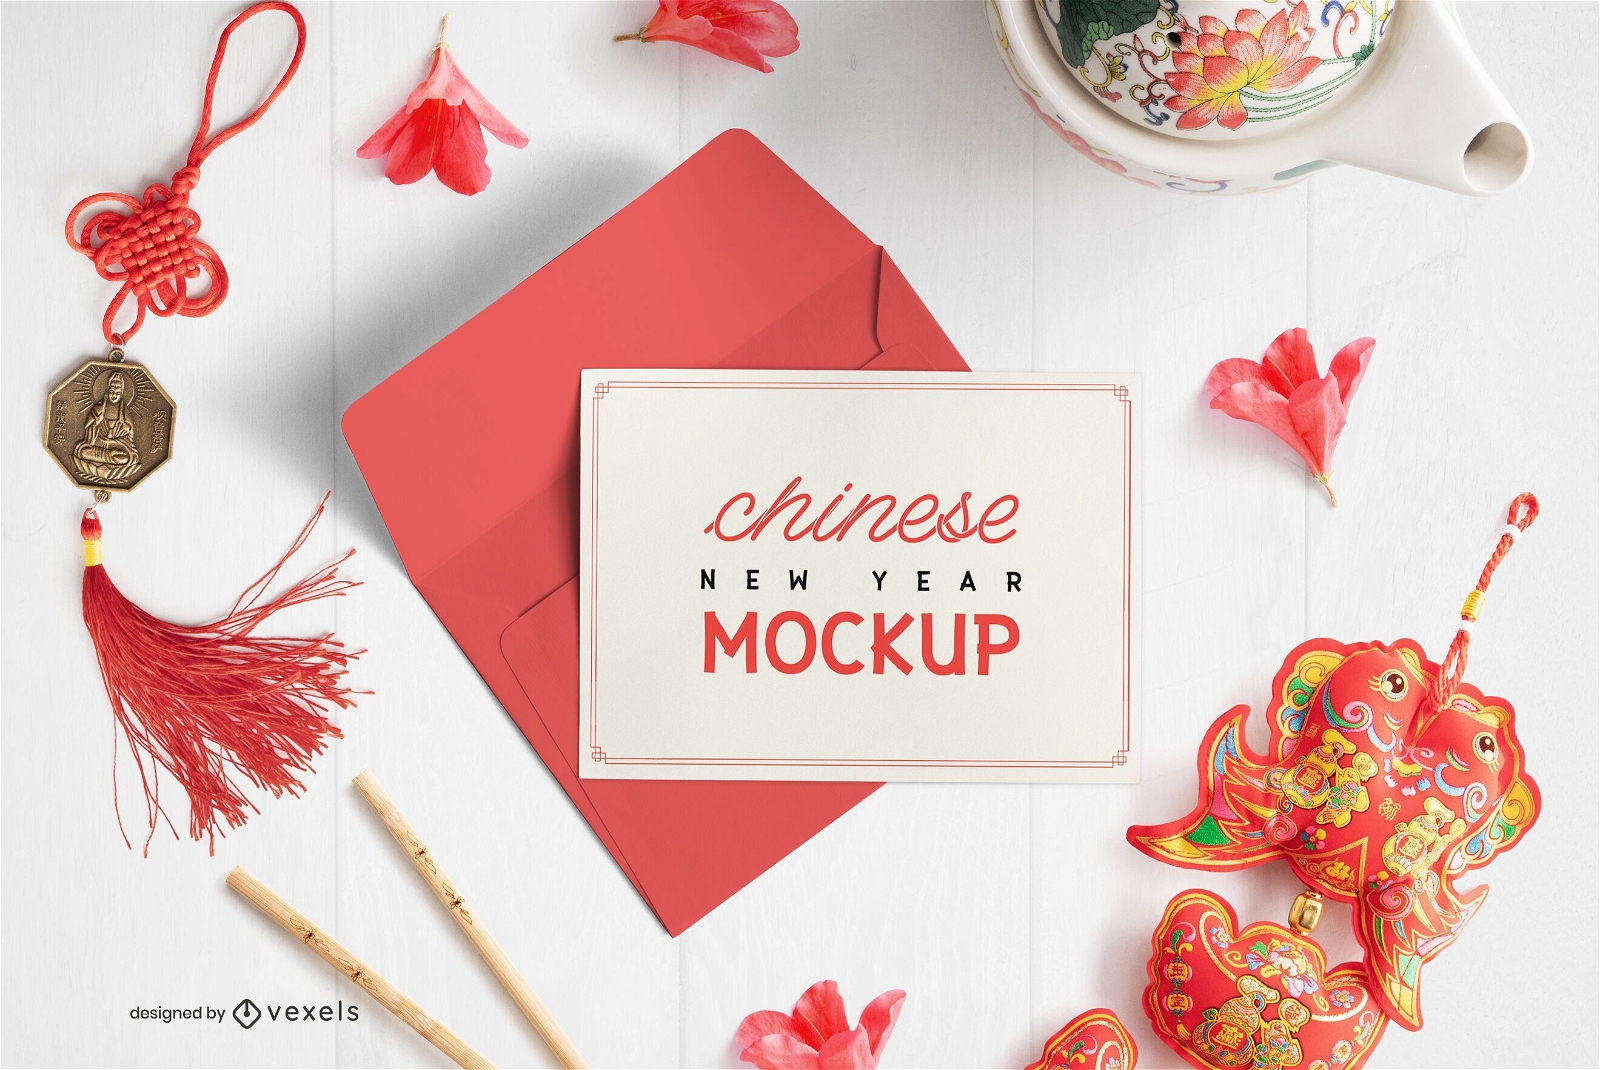 Premium PSD, Flat lay of chinese new year mock-up